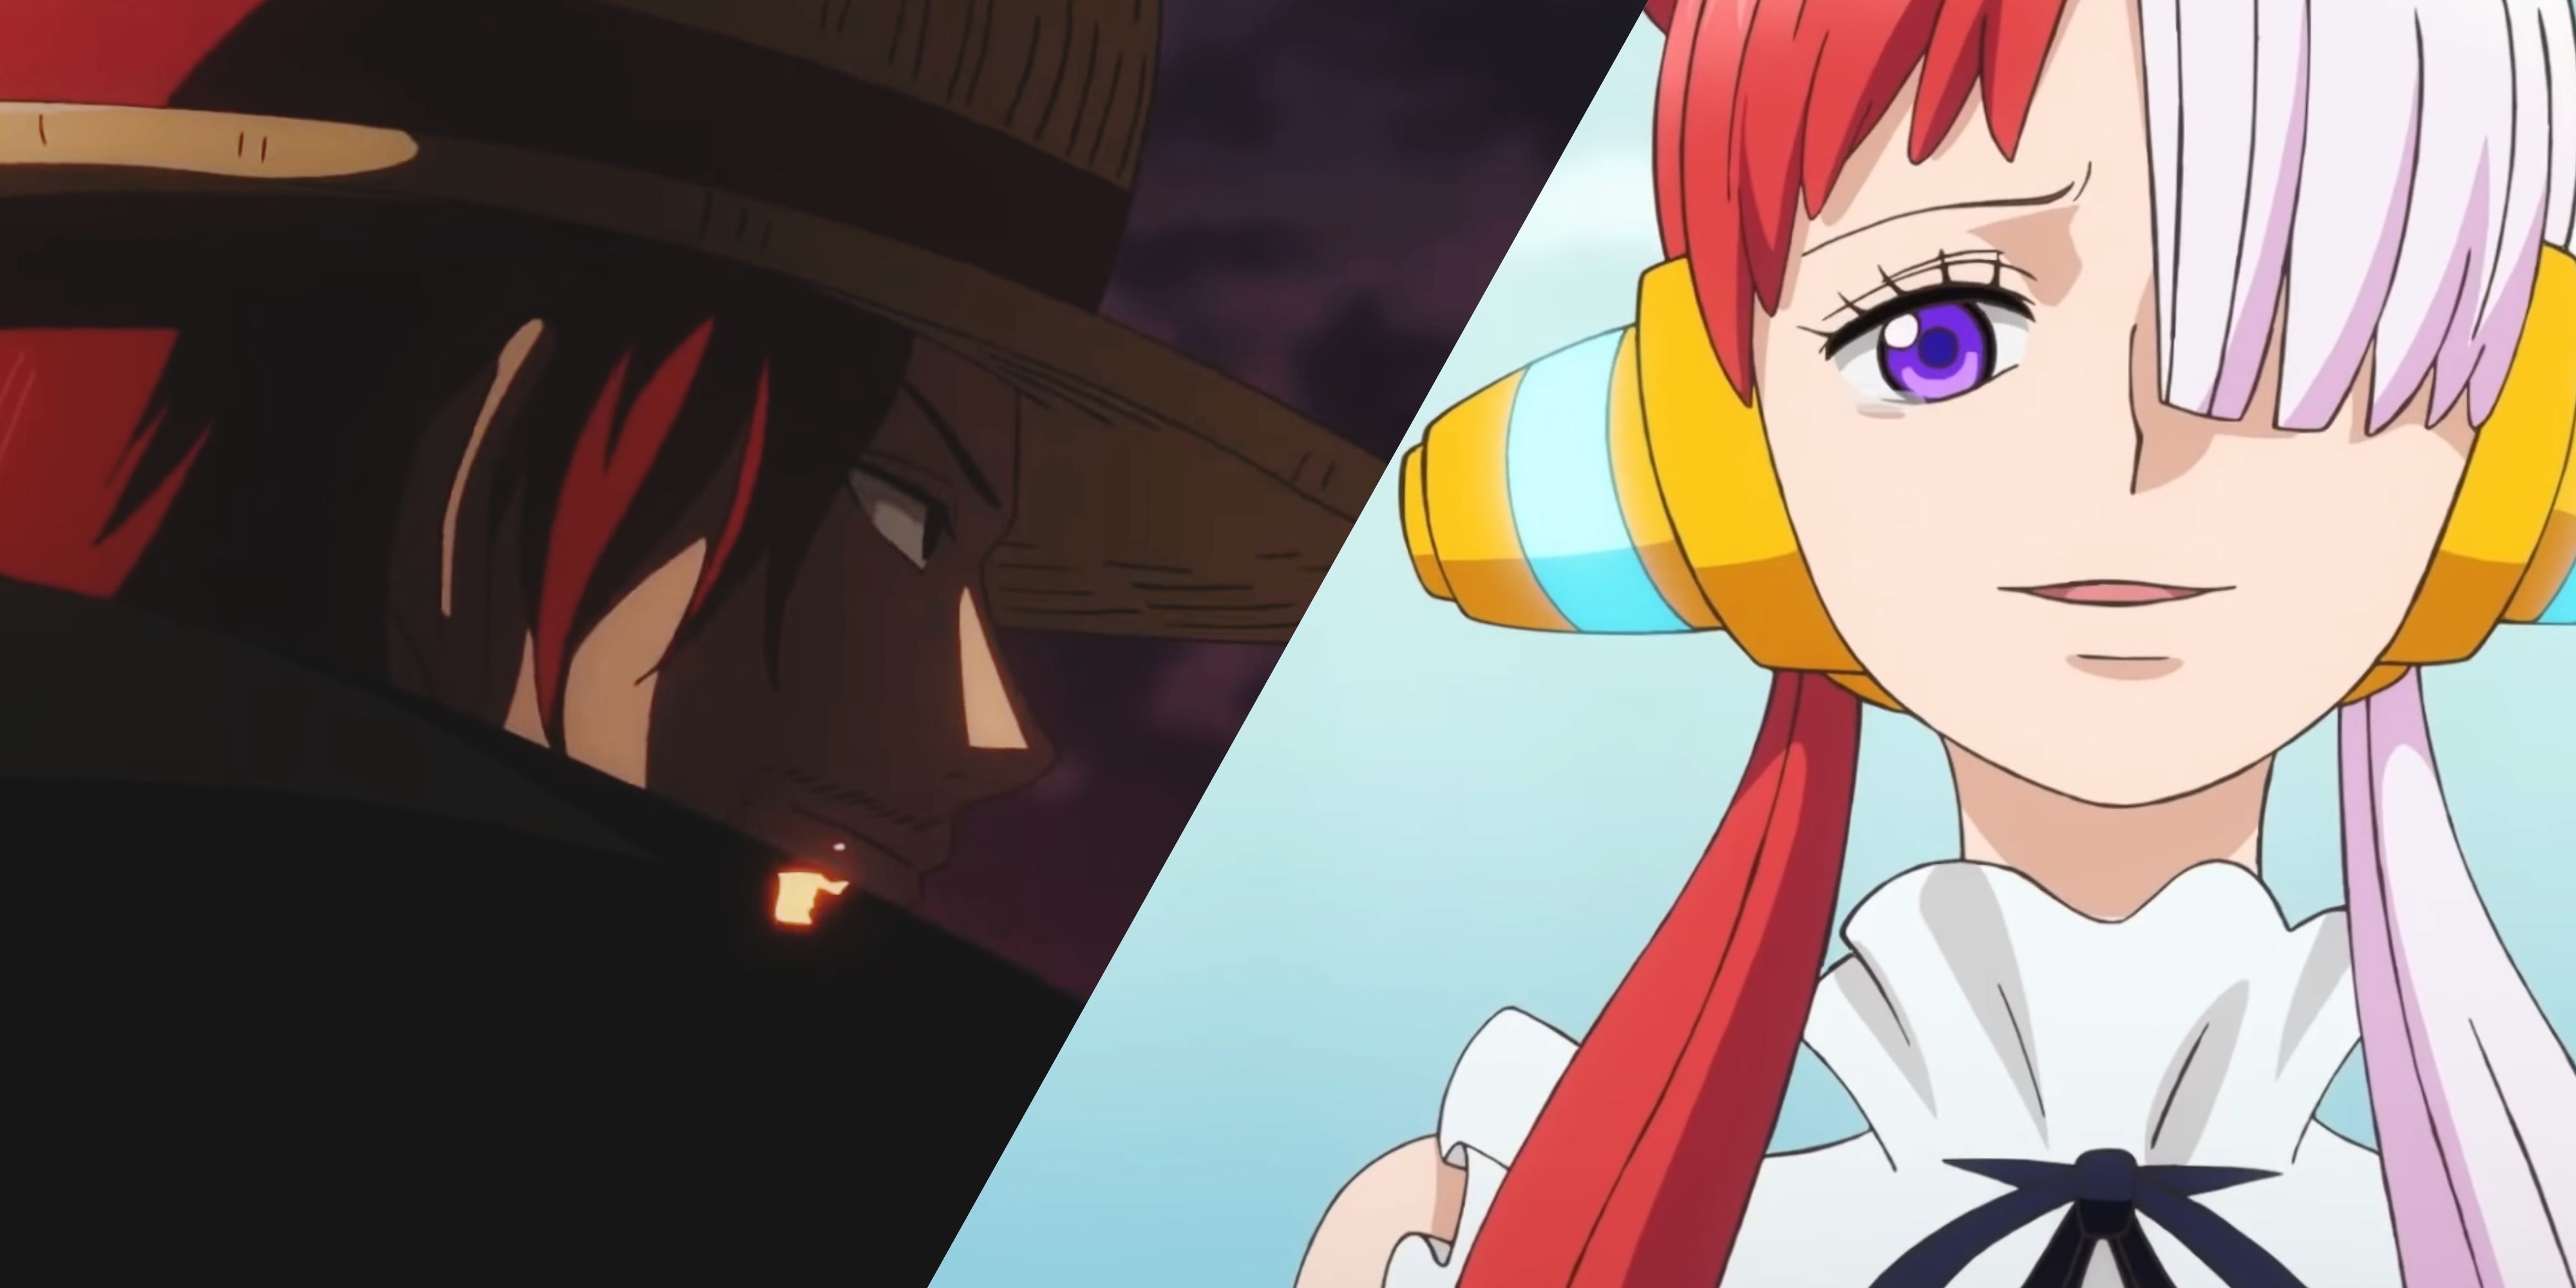 One Piece Special Edition (HD, Subtitled): East Blue (1-61) Luffy's Past!  Enter Red-Haired Shanks! - Watch on Crunchyroll